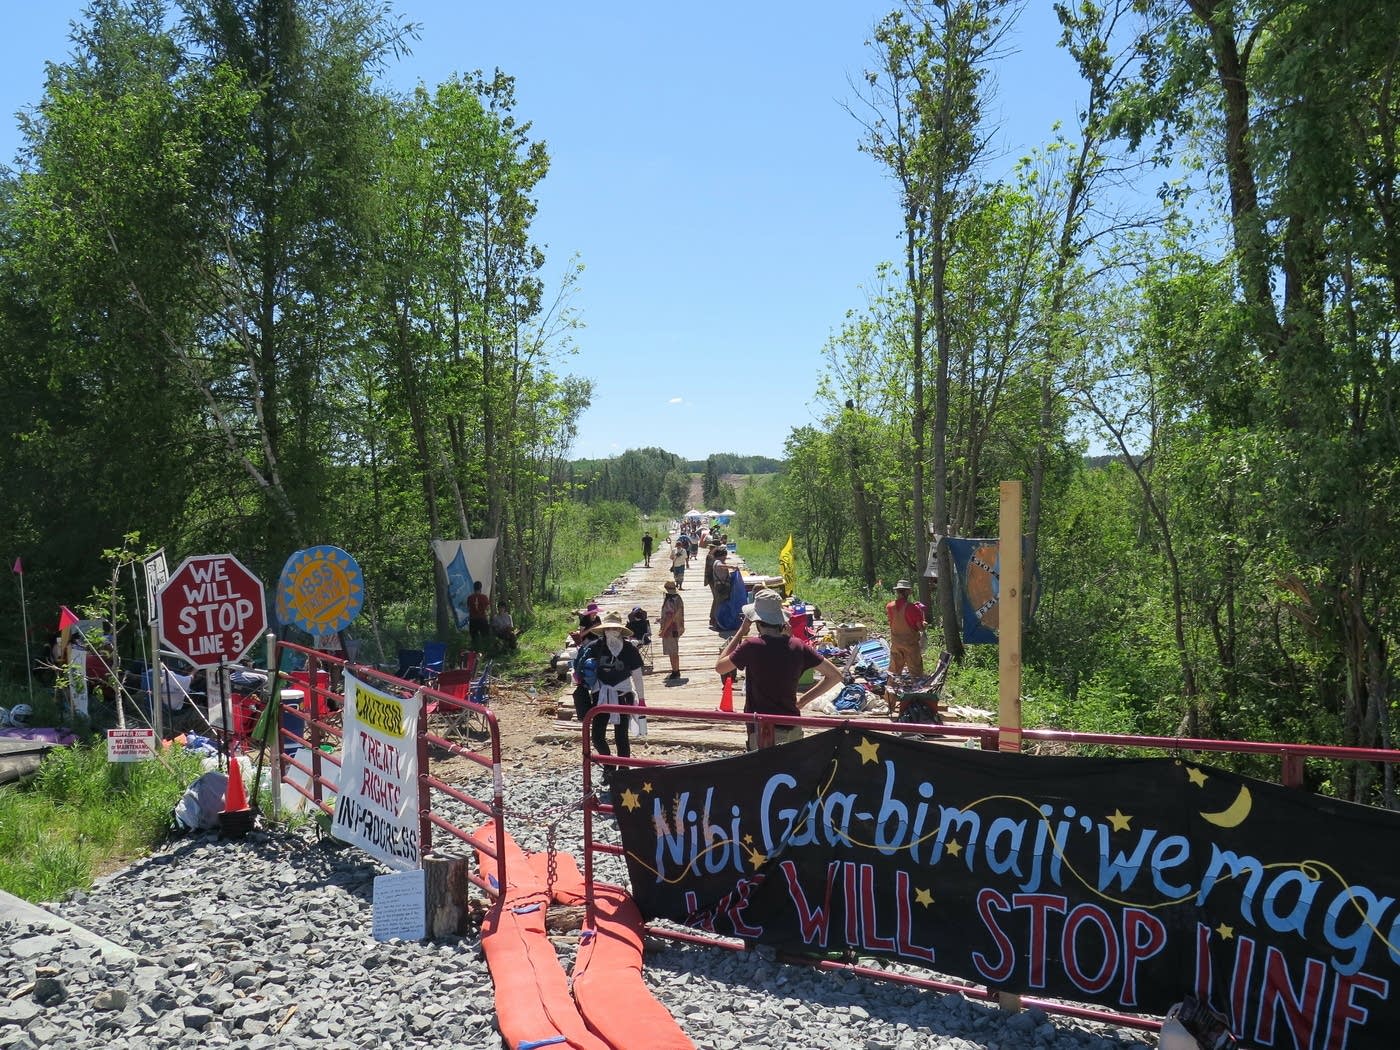 a gravel road that has a gate covered in signs in indigenous languages. signs in english read "we will stop line 3" and similar phrases. beyond the gate on the road protestors line out